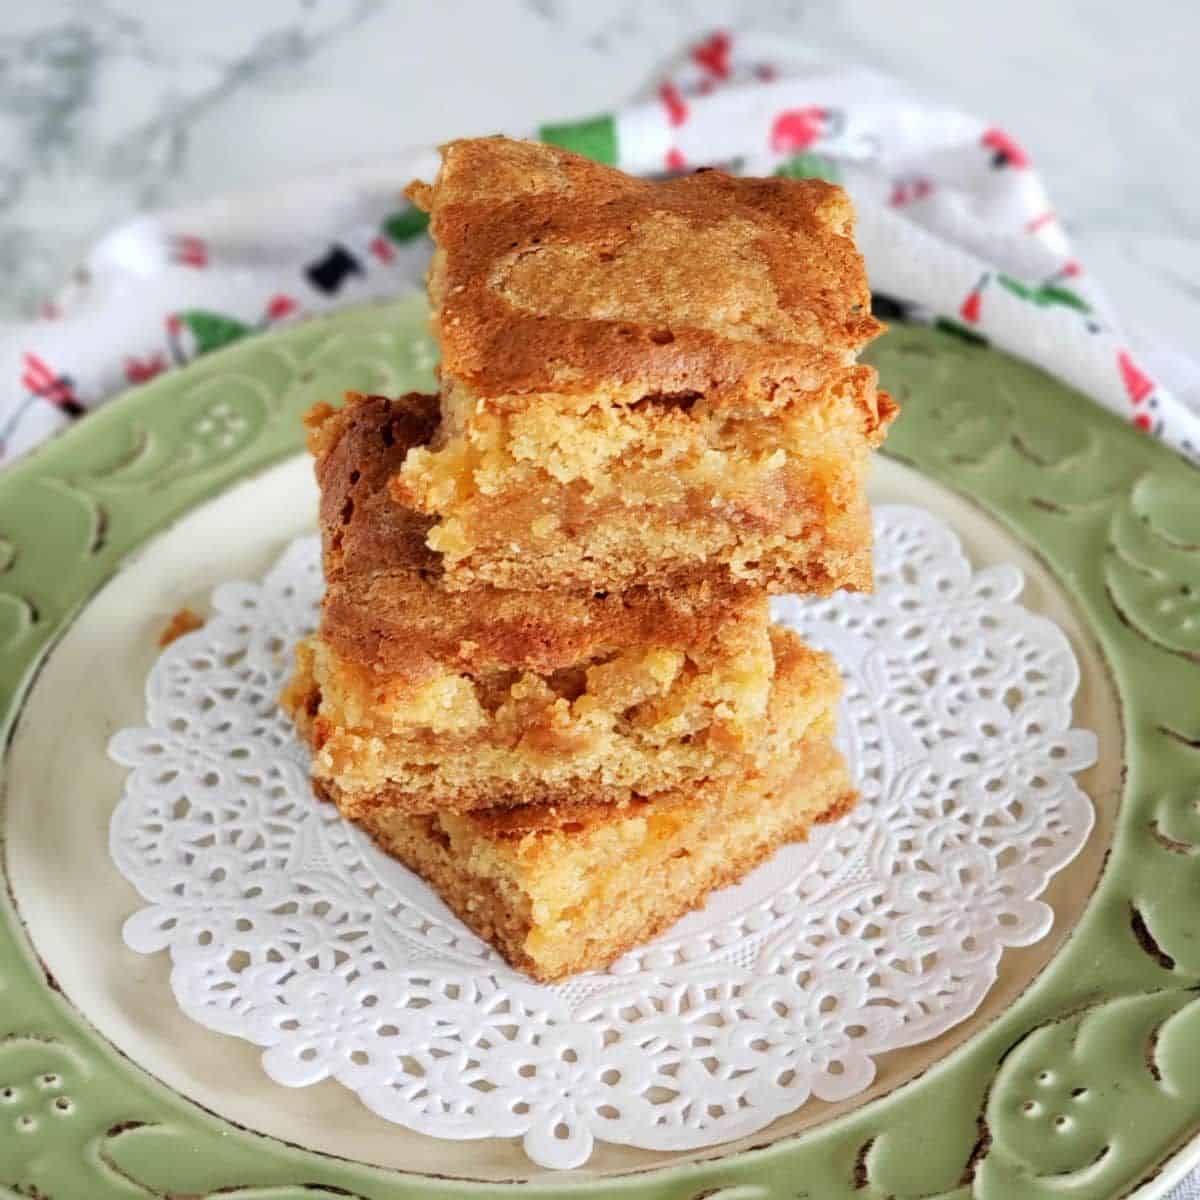 A pile of almond paste squares on a tray.